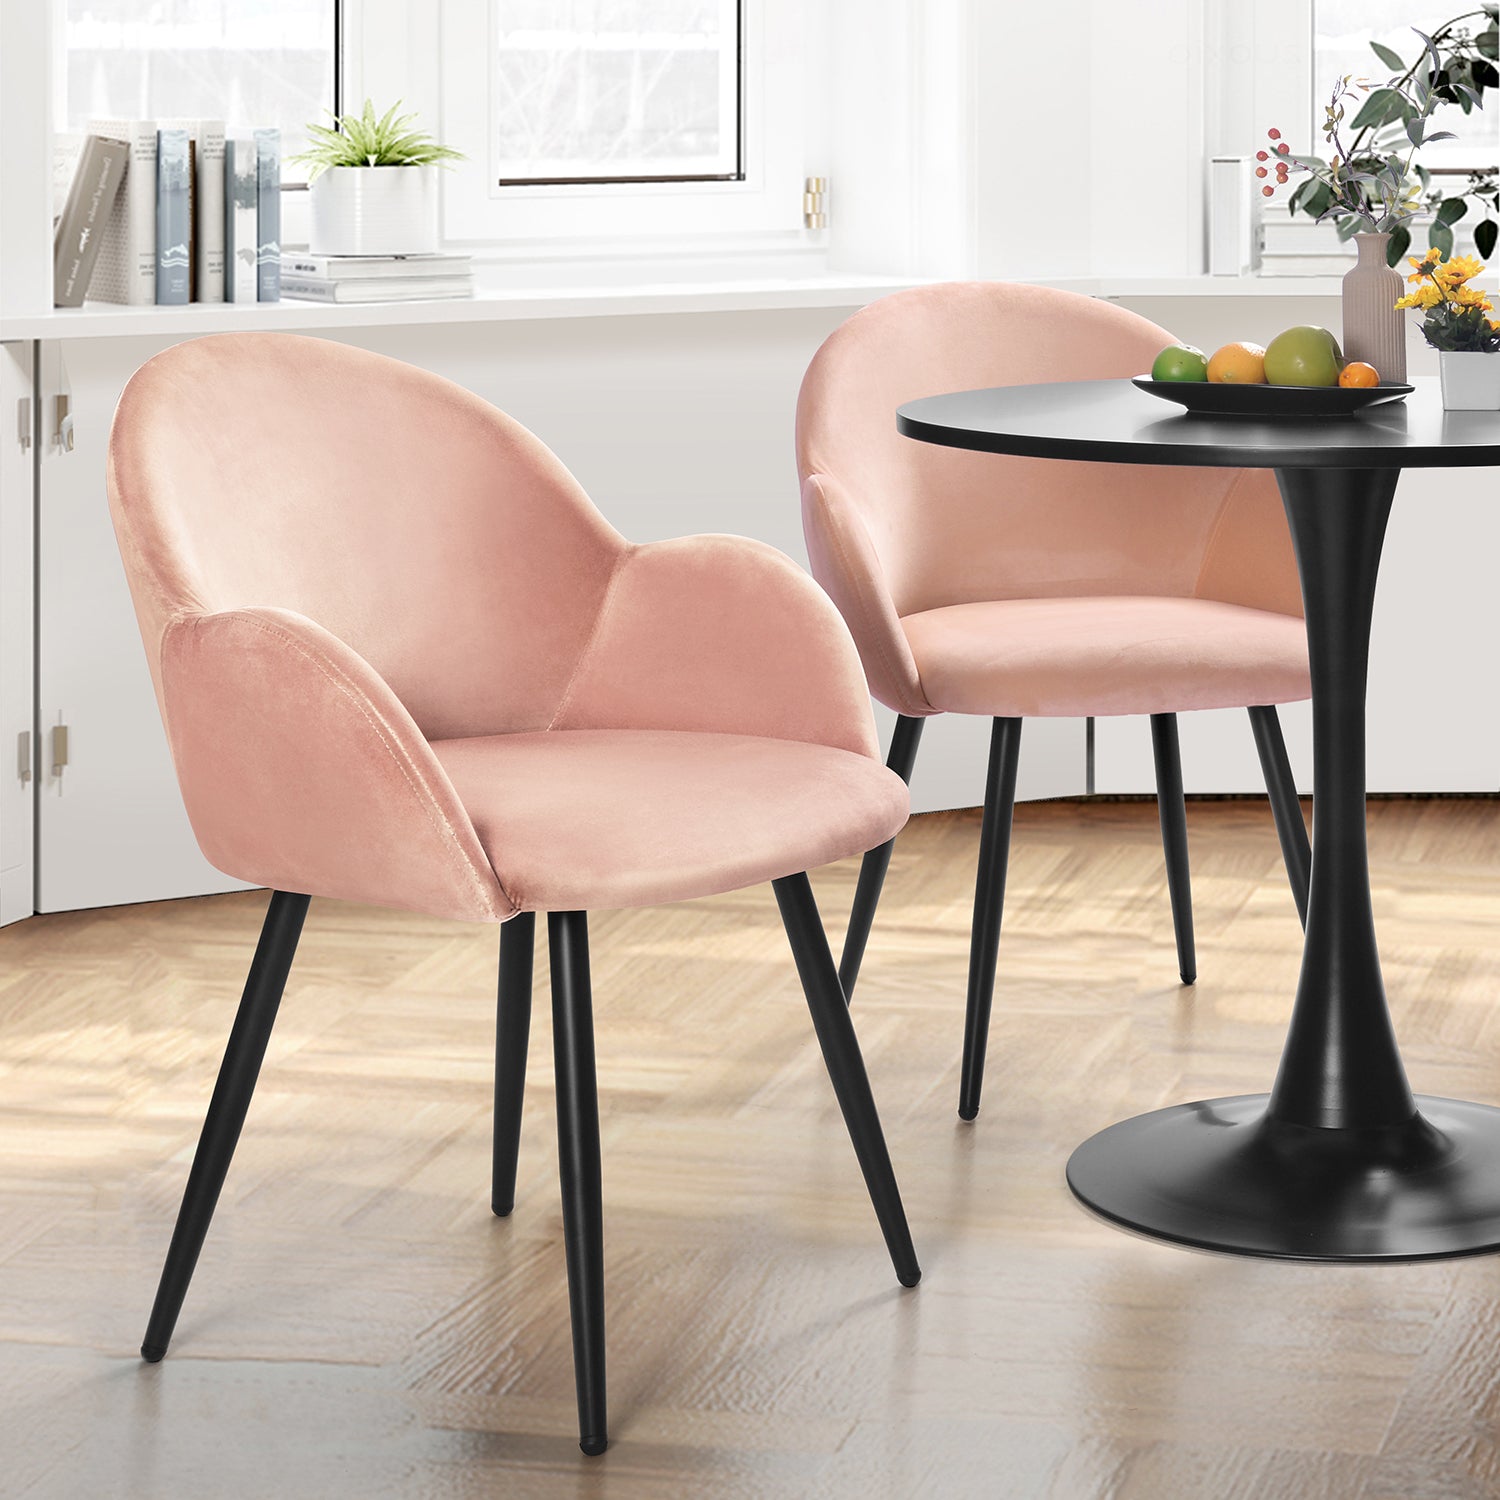 Set of 2 Scandinavian dining chairs in pink fabric - CHIOZZA EVENING SAND